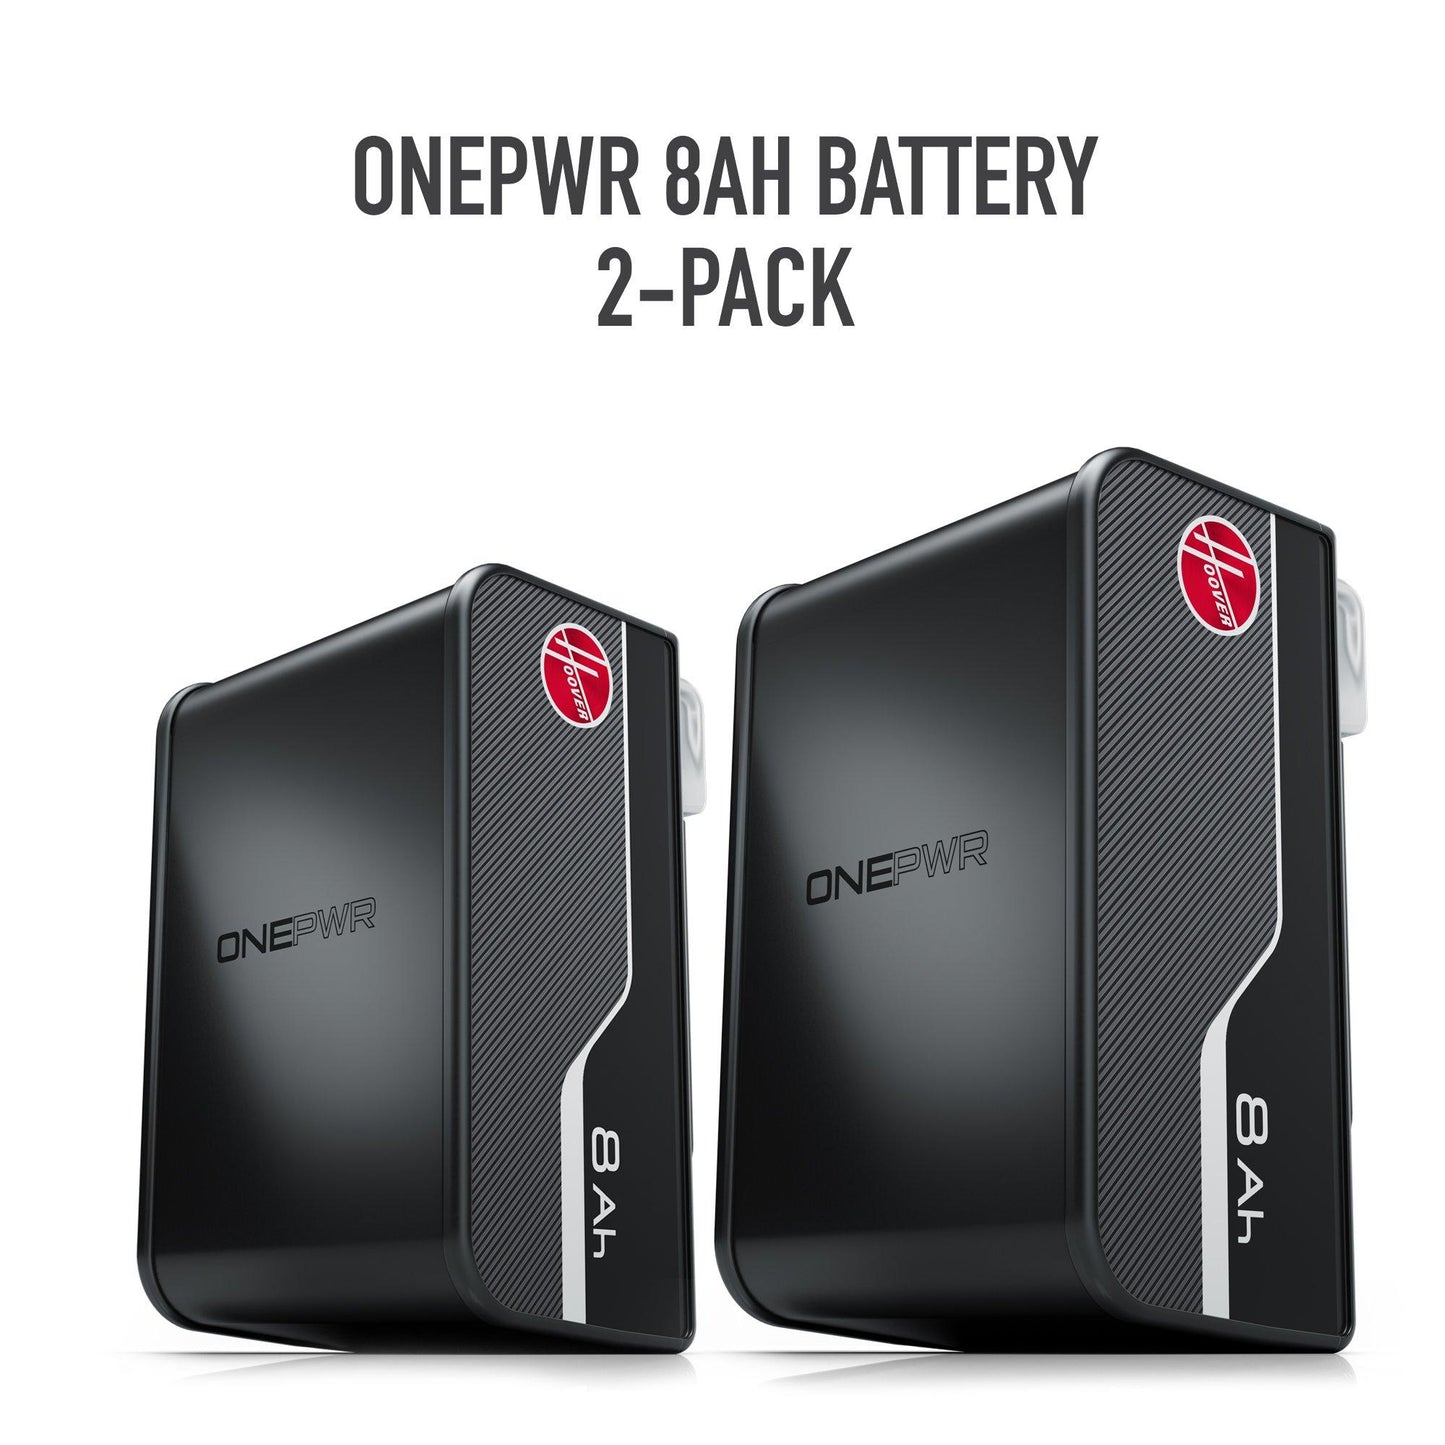 ONEPWR 8Ah Battery (Two-Pack)